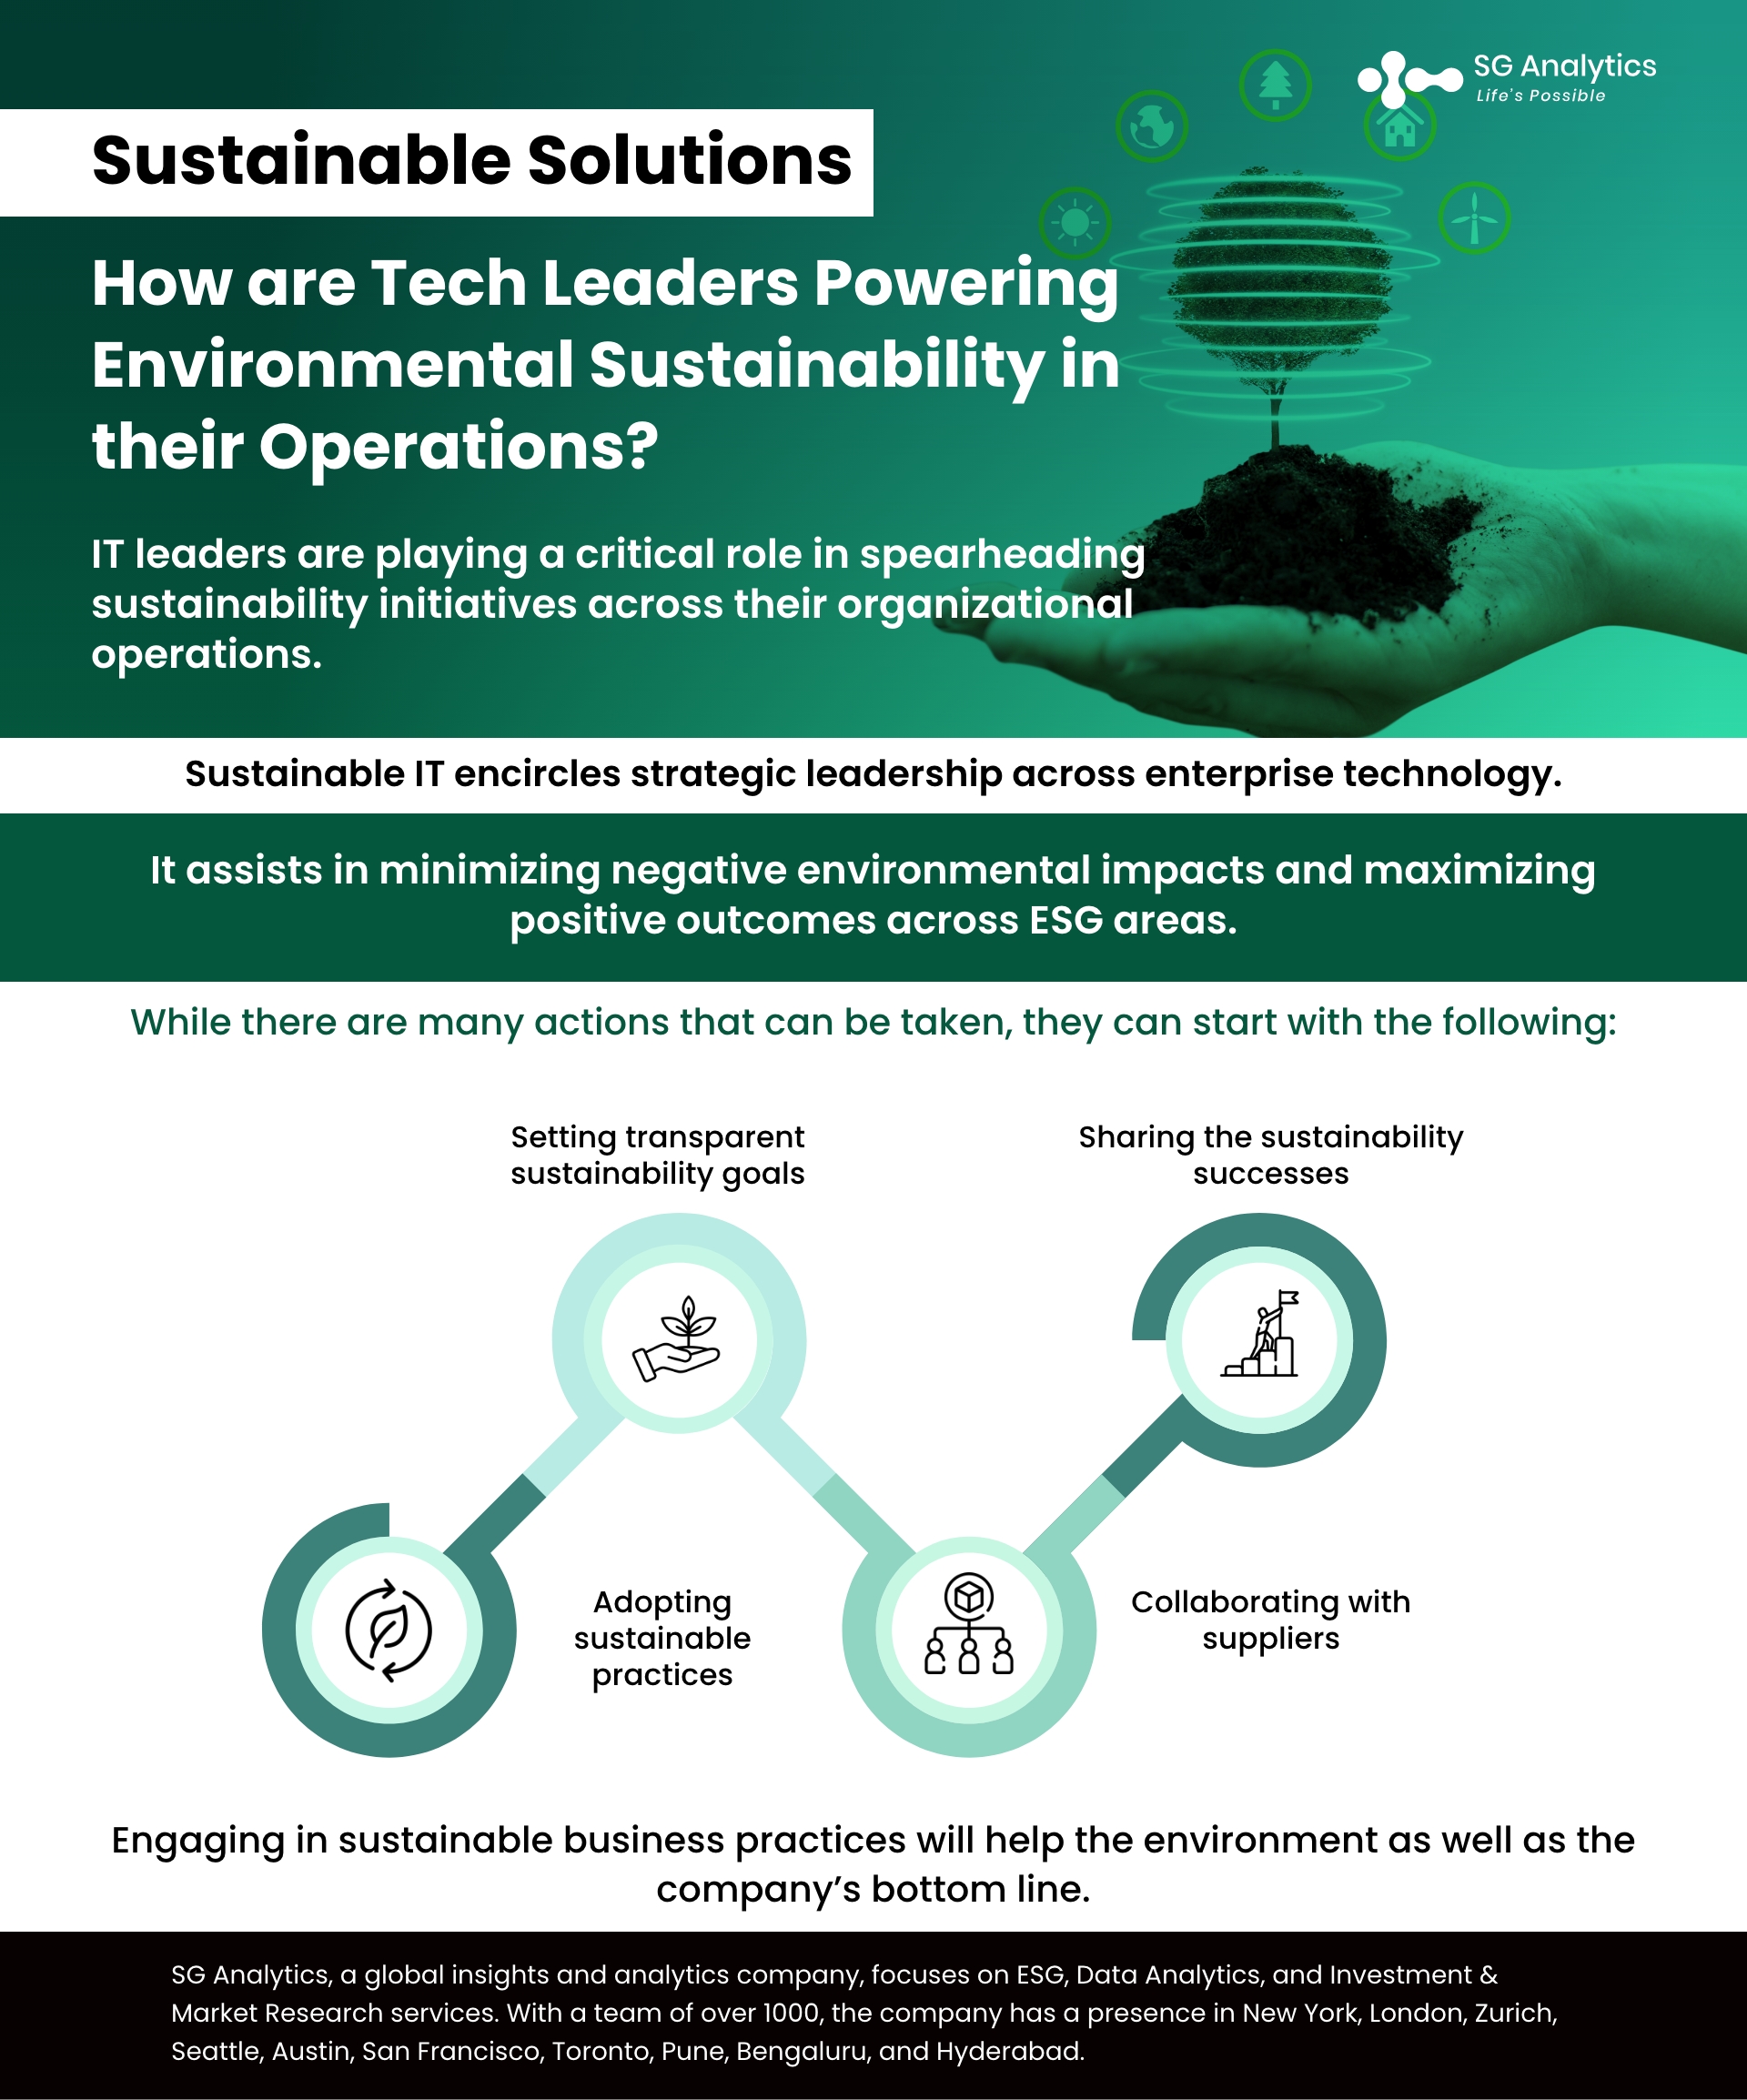 How are Tech Leaders Powering Environmental Sustainability in their Operations